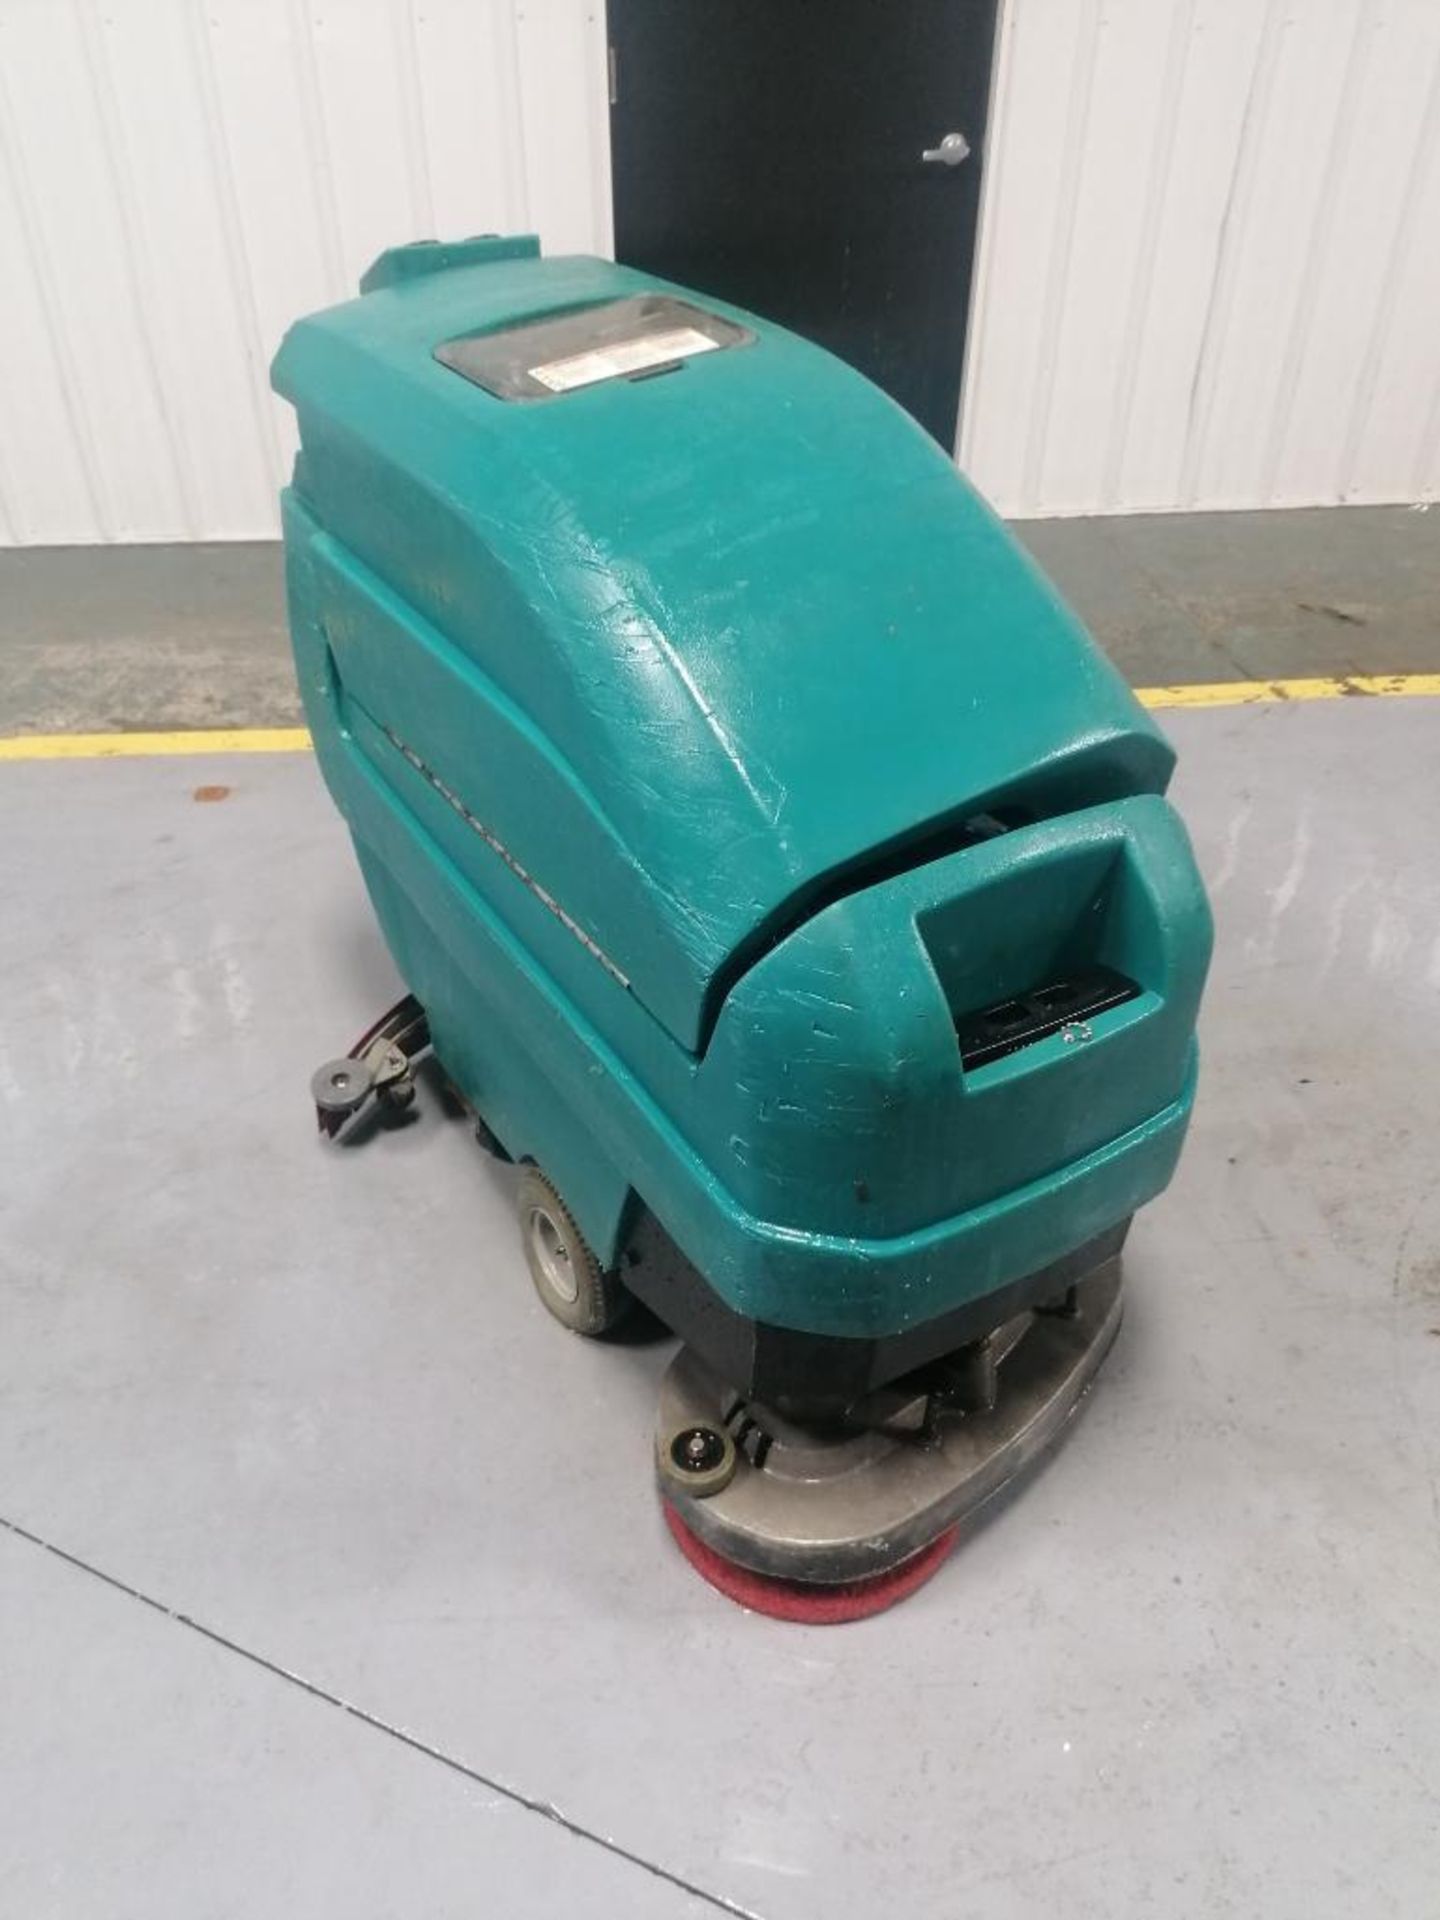 Tennant 5400 Floor Scrubber, Serial #540010229139 24 V, 21 Hours. Located in Mt. Pleasant, IA.